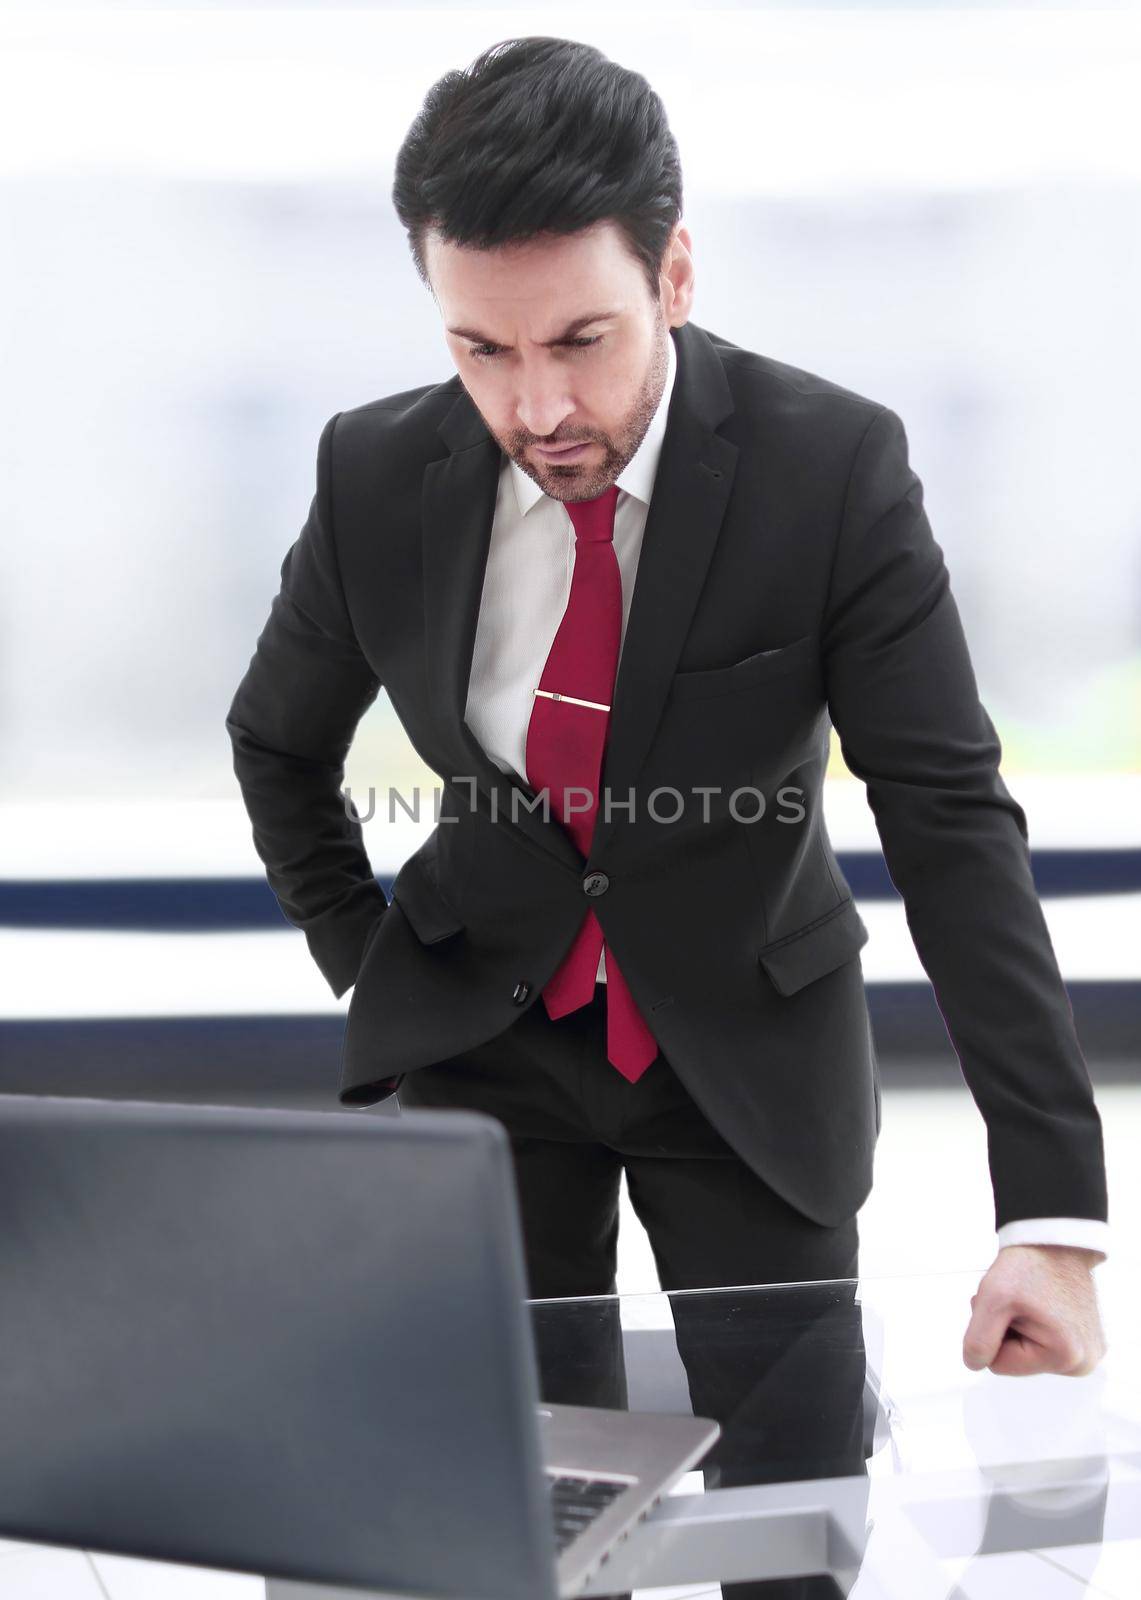 Businessman standing at his Desk and looking at the laptop screen by asdf